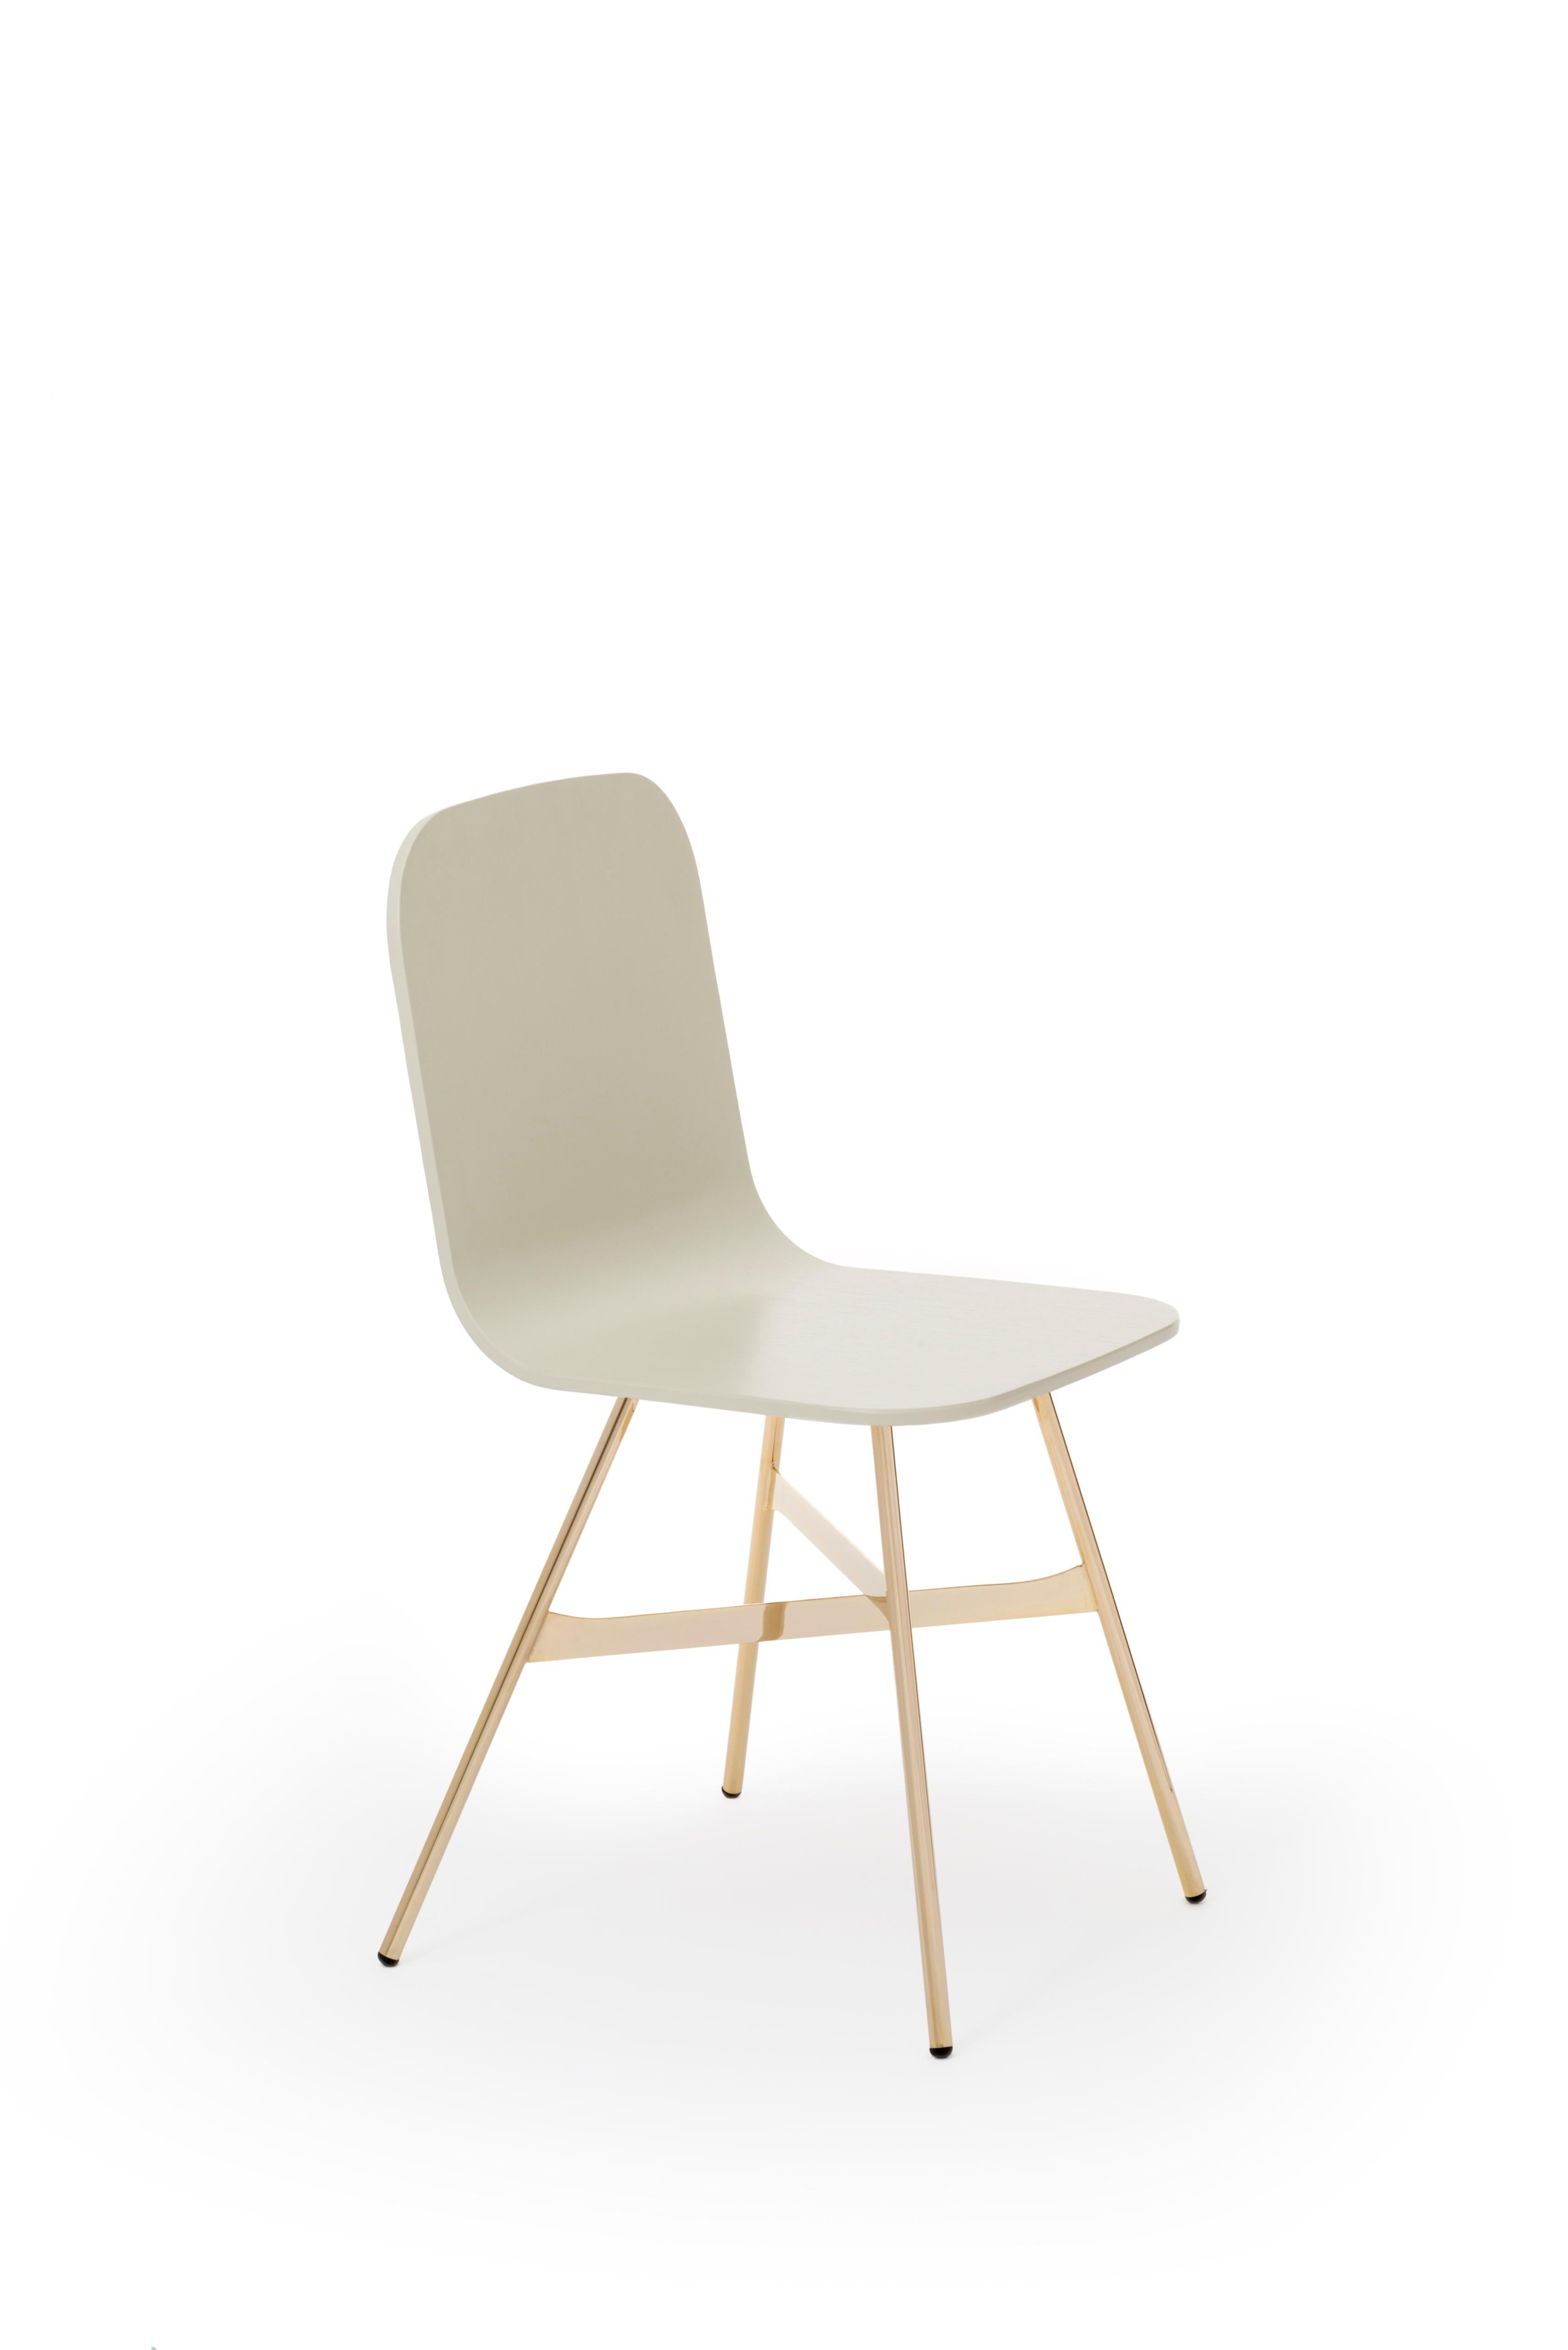 Oak Tria Simple Chair, Golden Legs, Minimalist Design Icon Inspired to Graphic Art For Sale